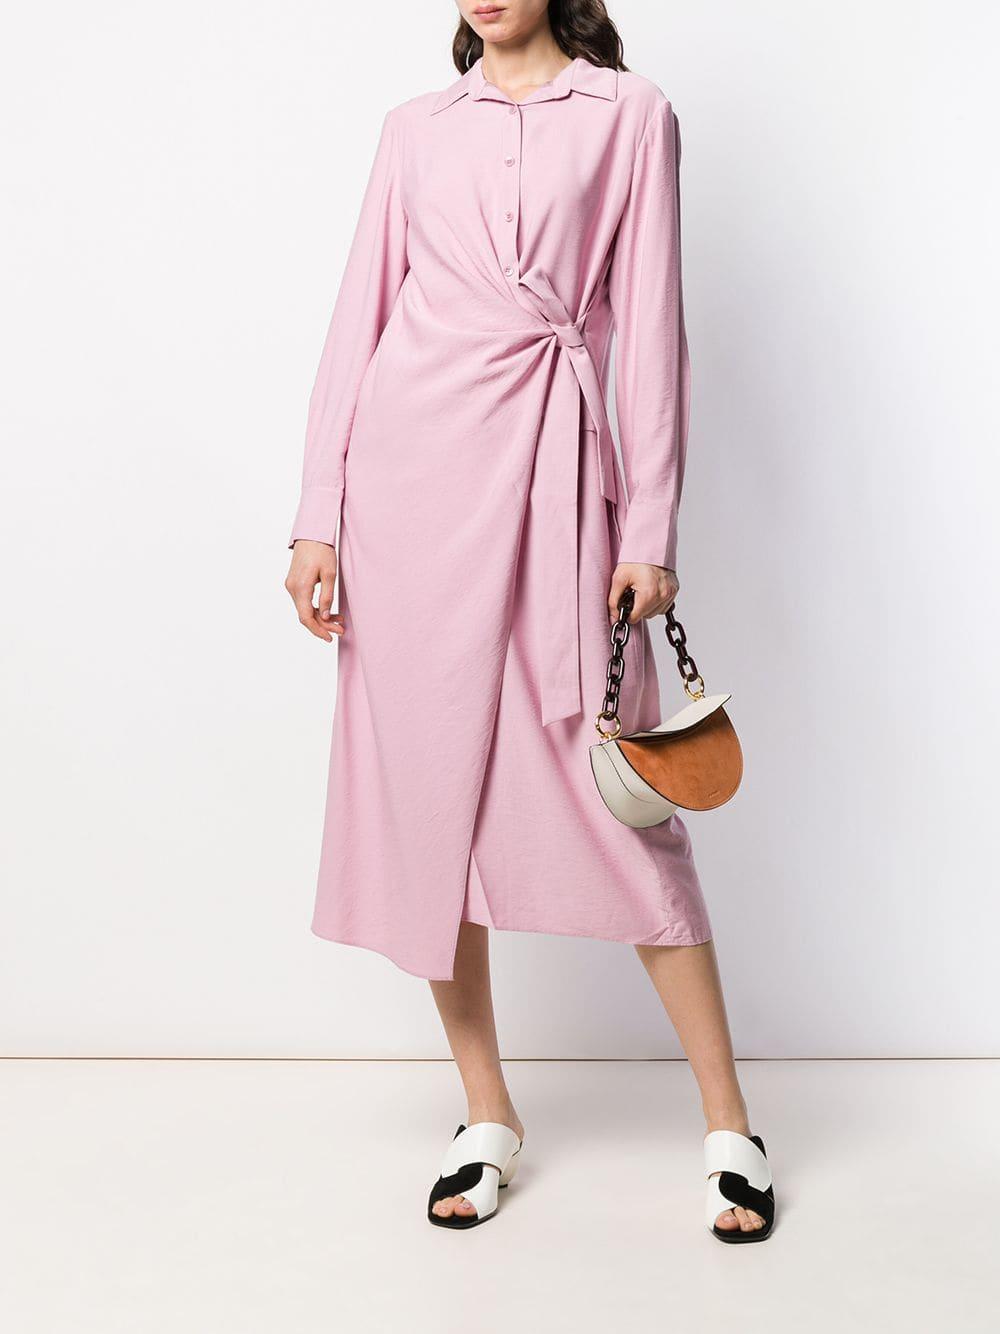 Tibi Synthetic Viscose Twill Shirtdress in Pink Lilac (Pink) - Lyst